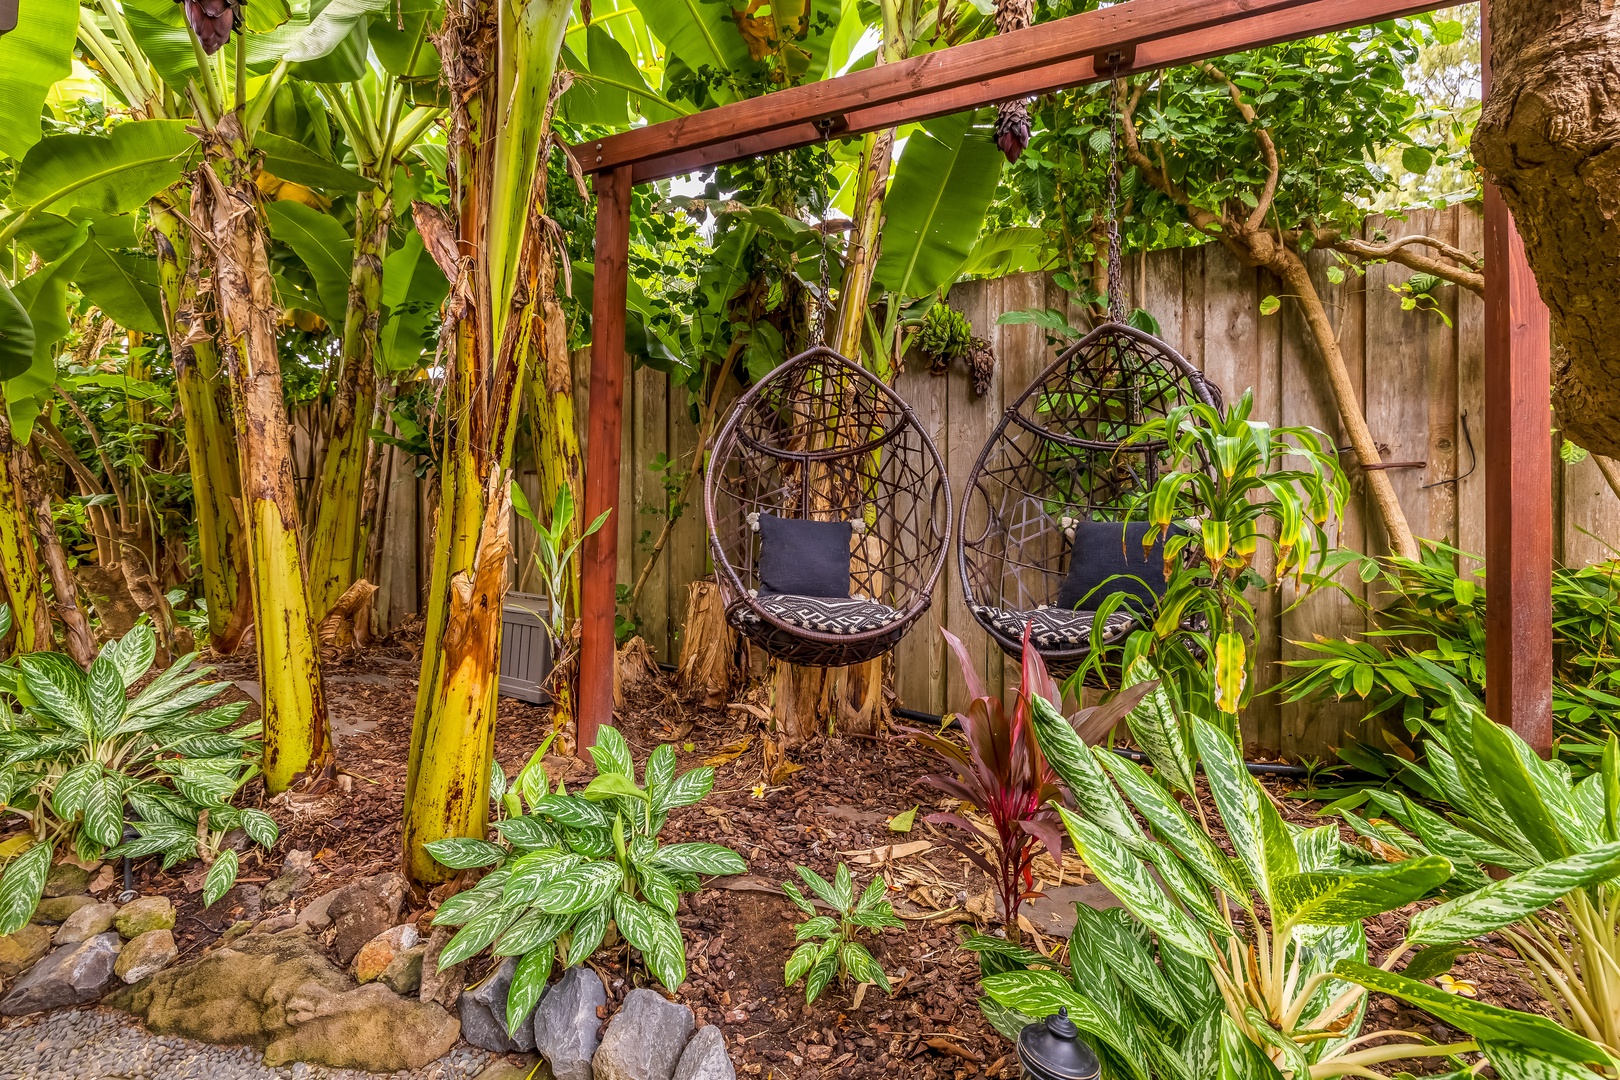 Waimanalo Vacation Rentals, Hawaii Hobbit House - There is a spot to relax for everyone!